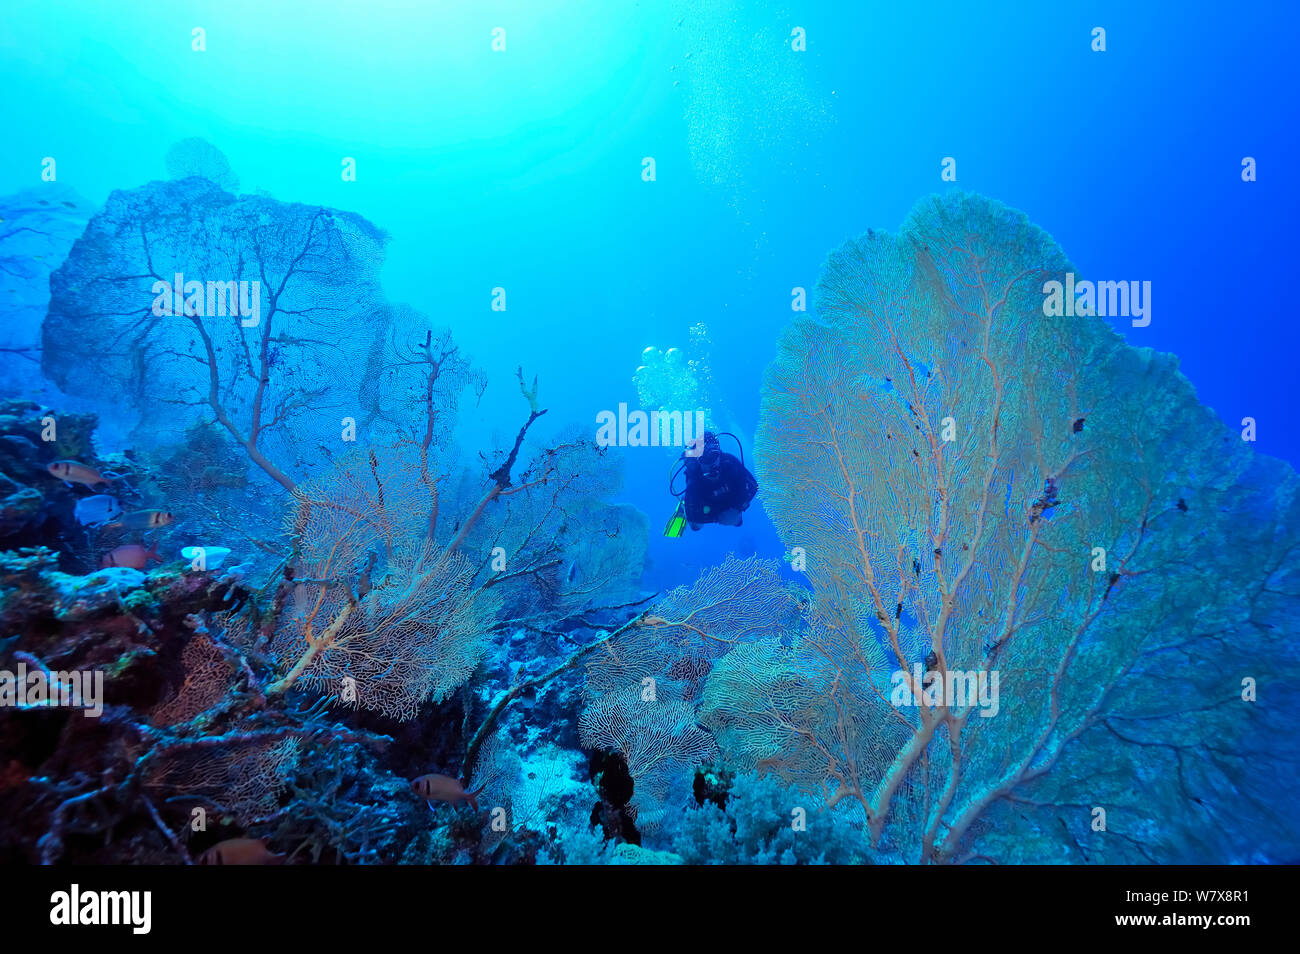 Diver in a forest of Giant seafans (Subergorgia mollis) Mayotte. Indian Ocean. February 2010. Stock Photo